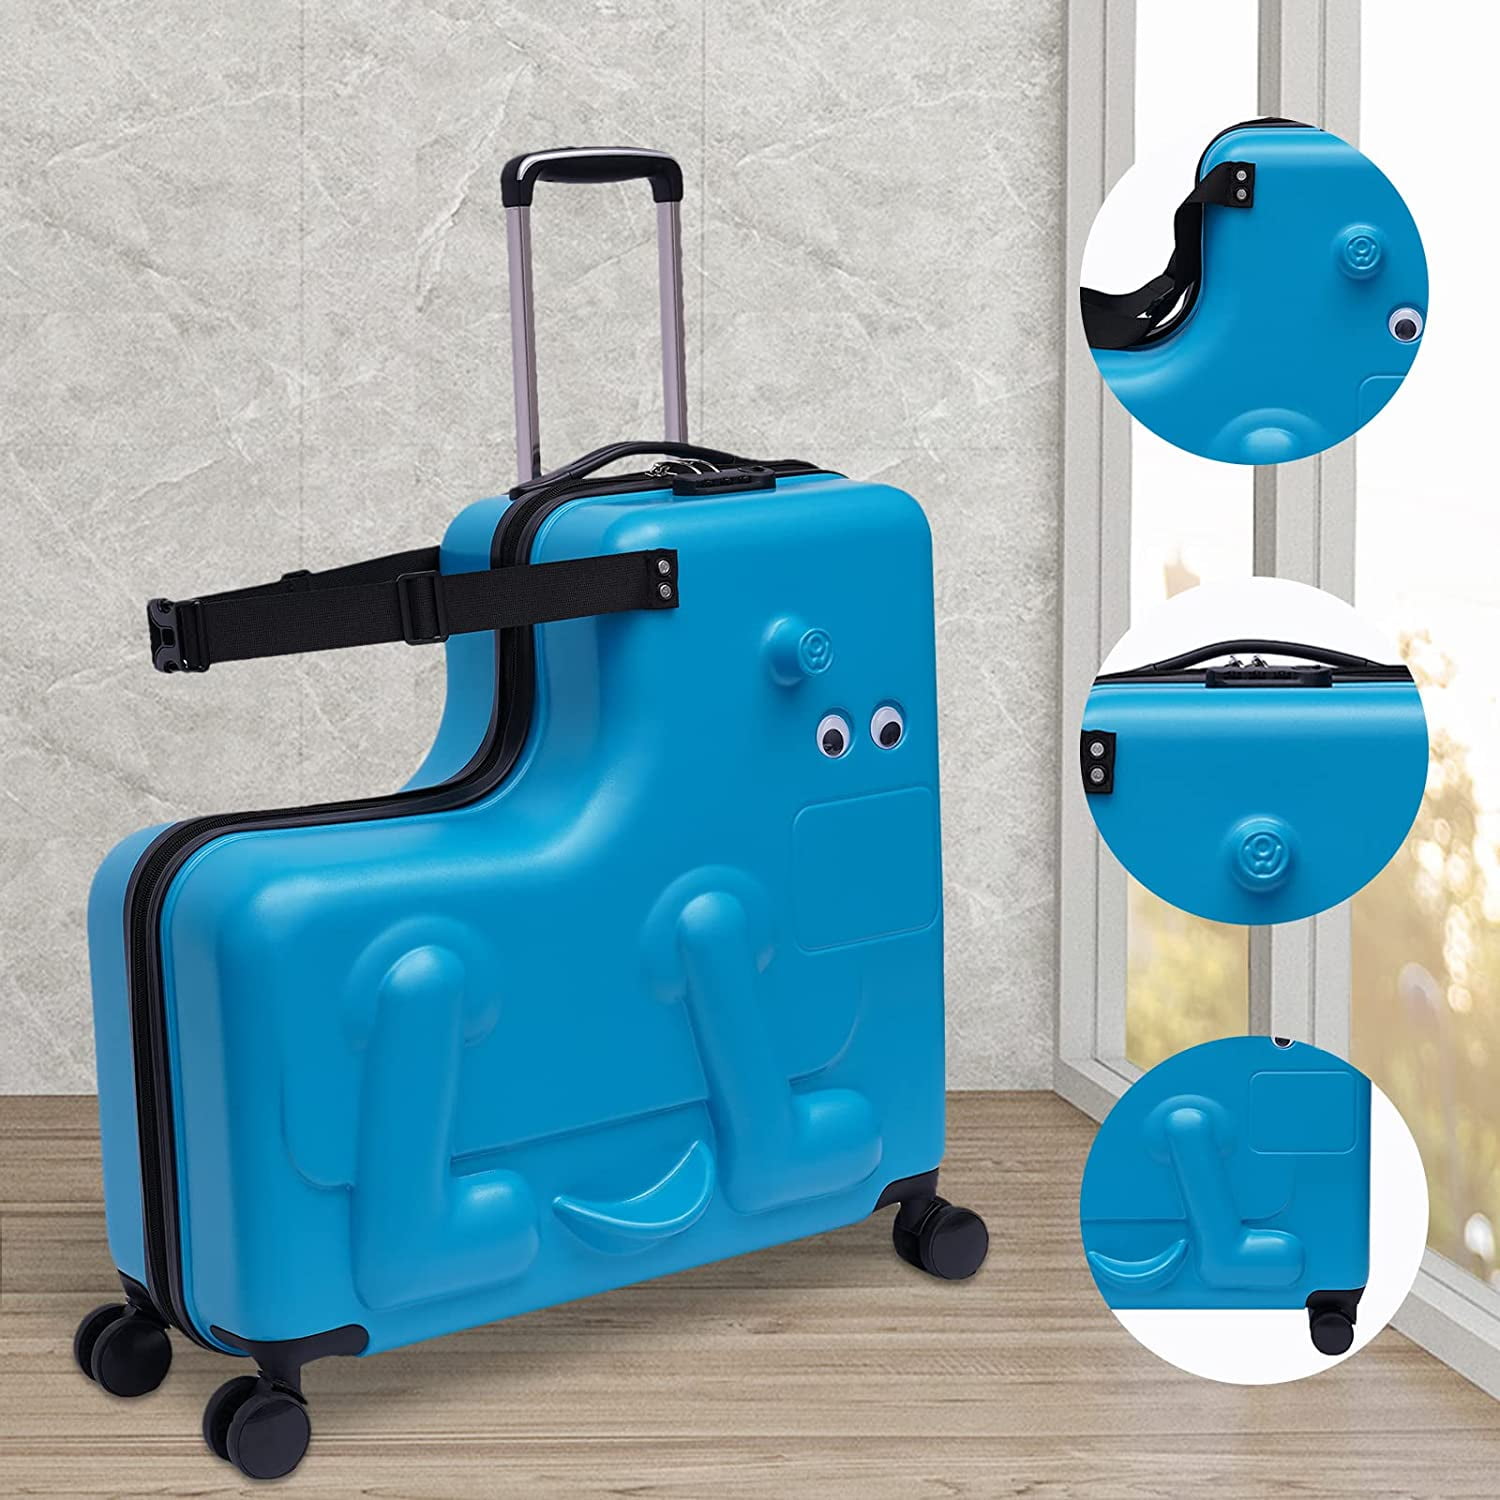 24 Inch Children's Ride-On Trolley Luggage Portable Universal Wheel Luggage ABS+PC Waterproof Unisex Boys Girls Travel Suitcase with Lock Rideable Luggage Aged 6-12 Years Old 